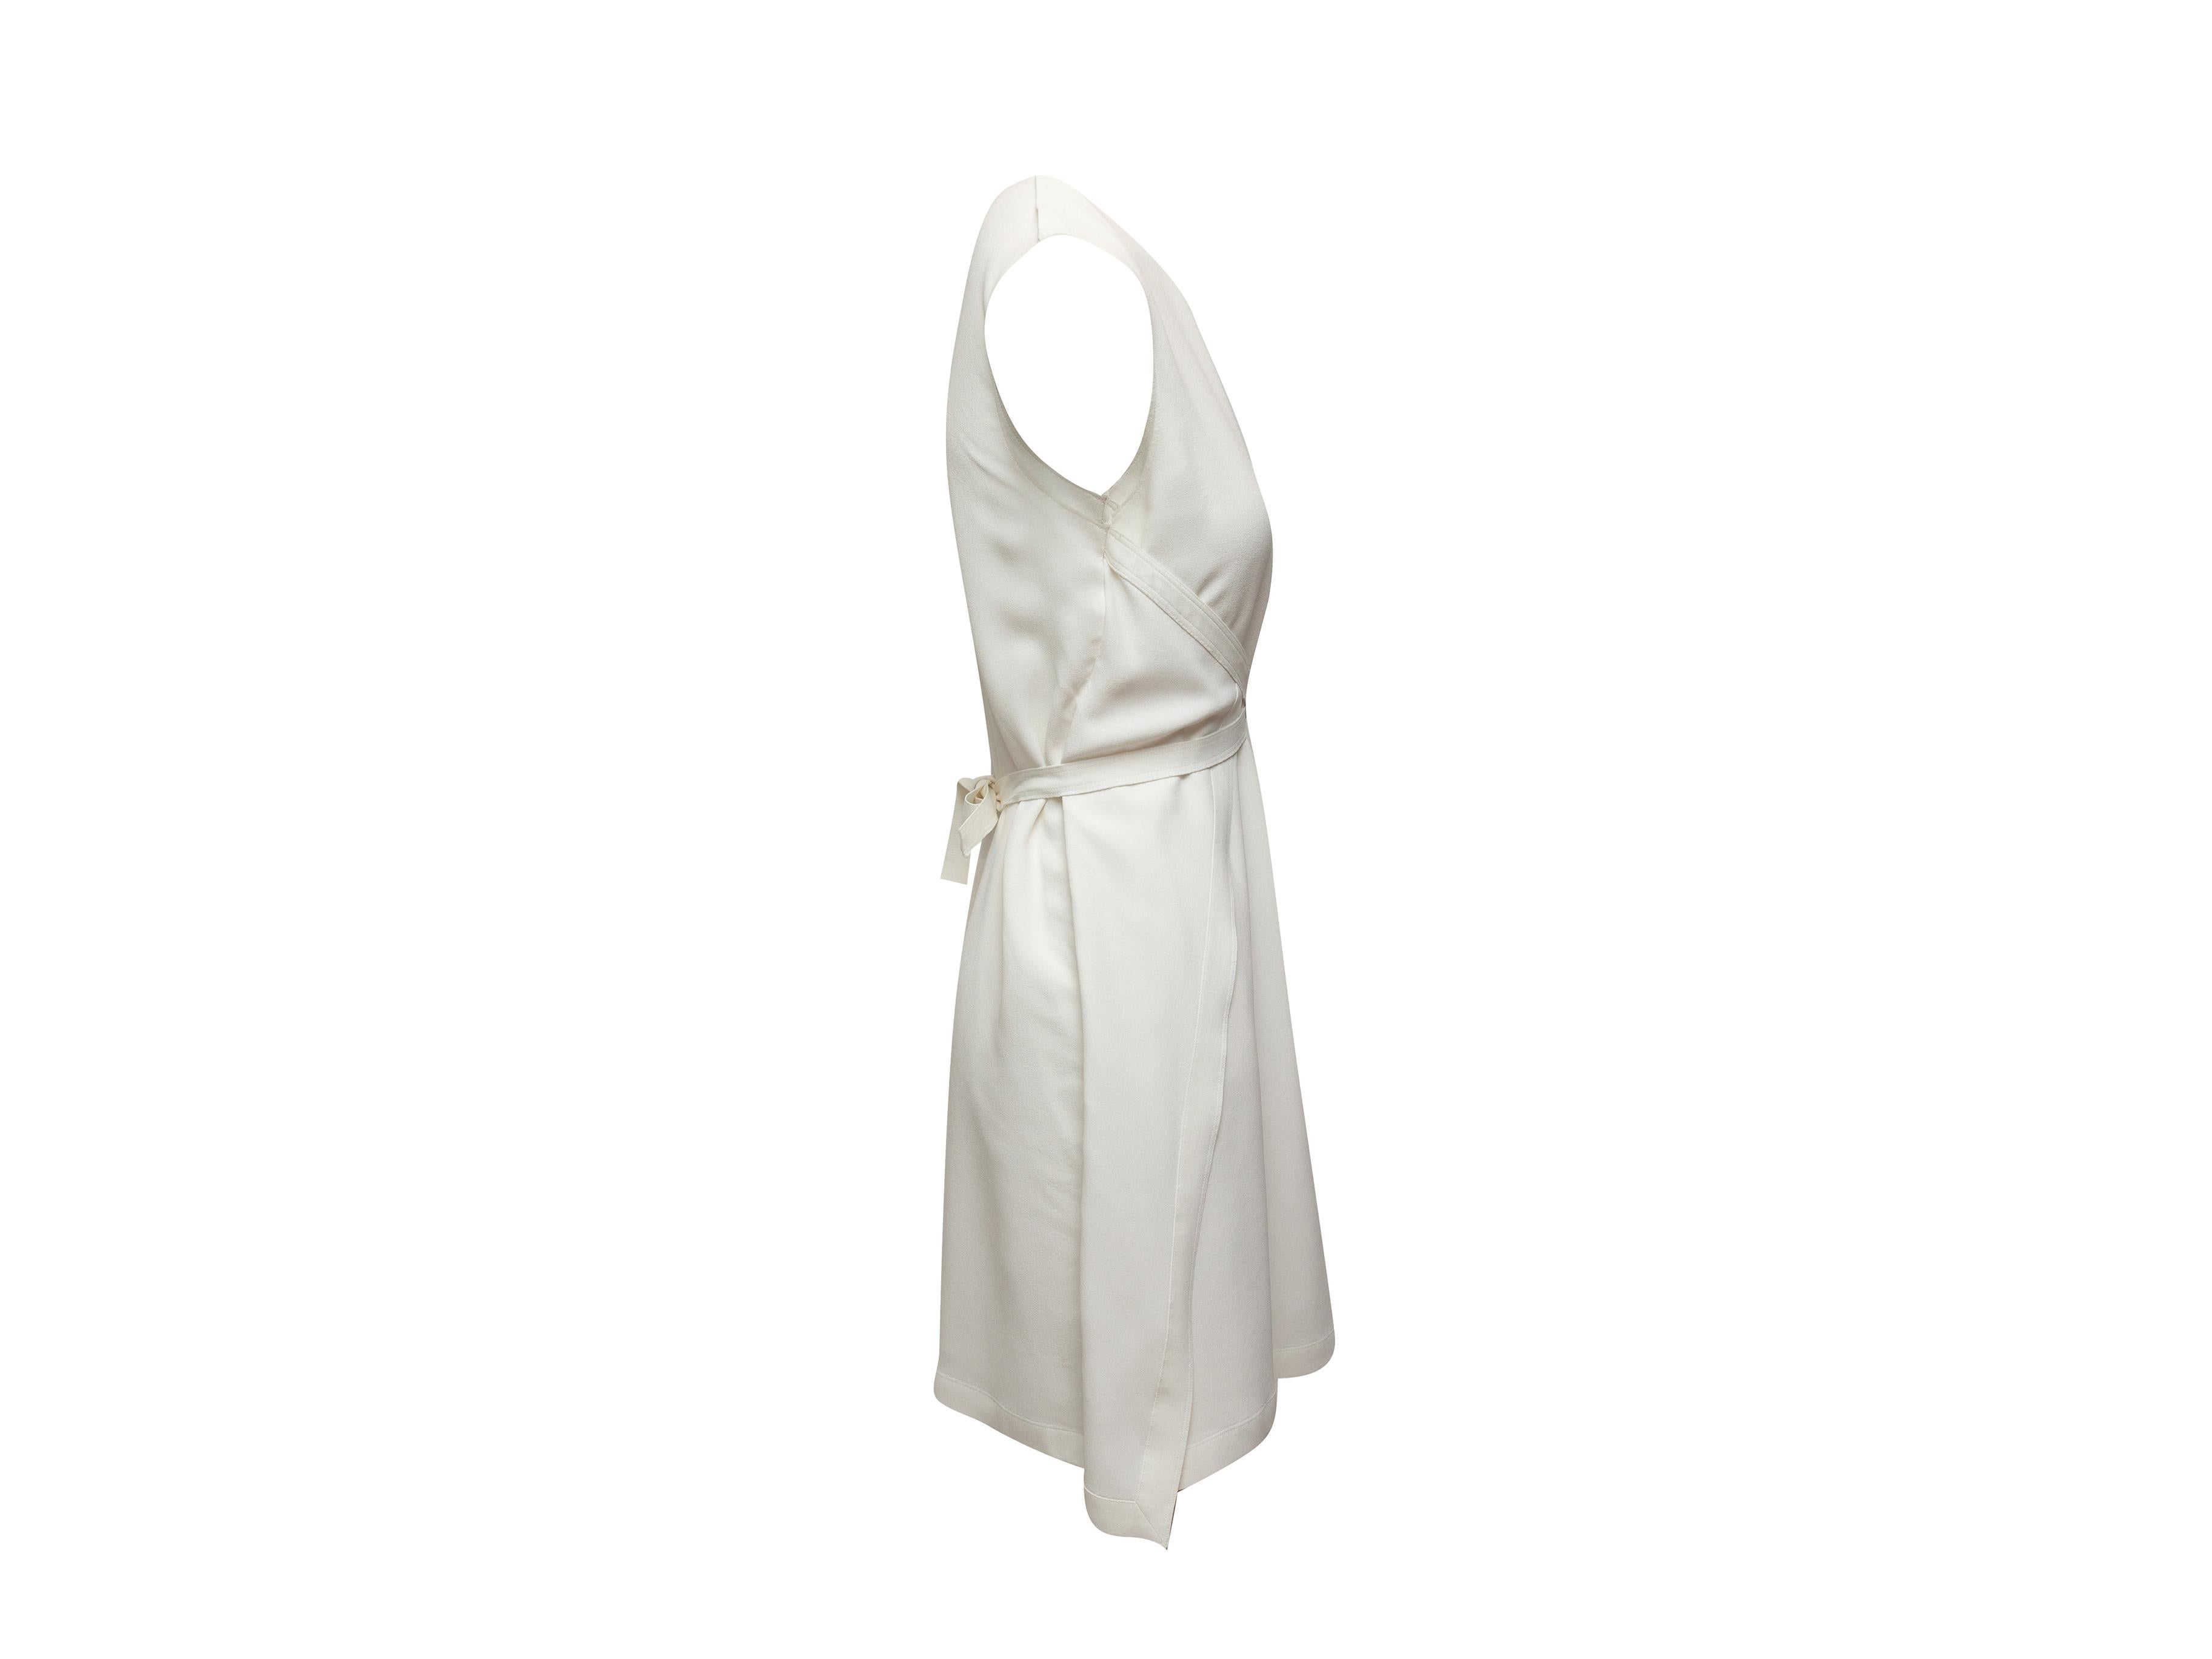 Product details: White sleeveless shift dress by Helmut Lang. Crew neck. Tie at back of waist. 36